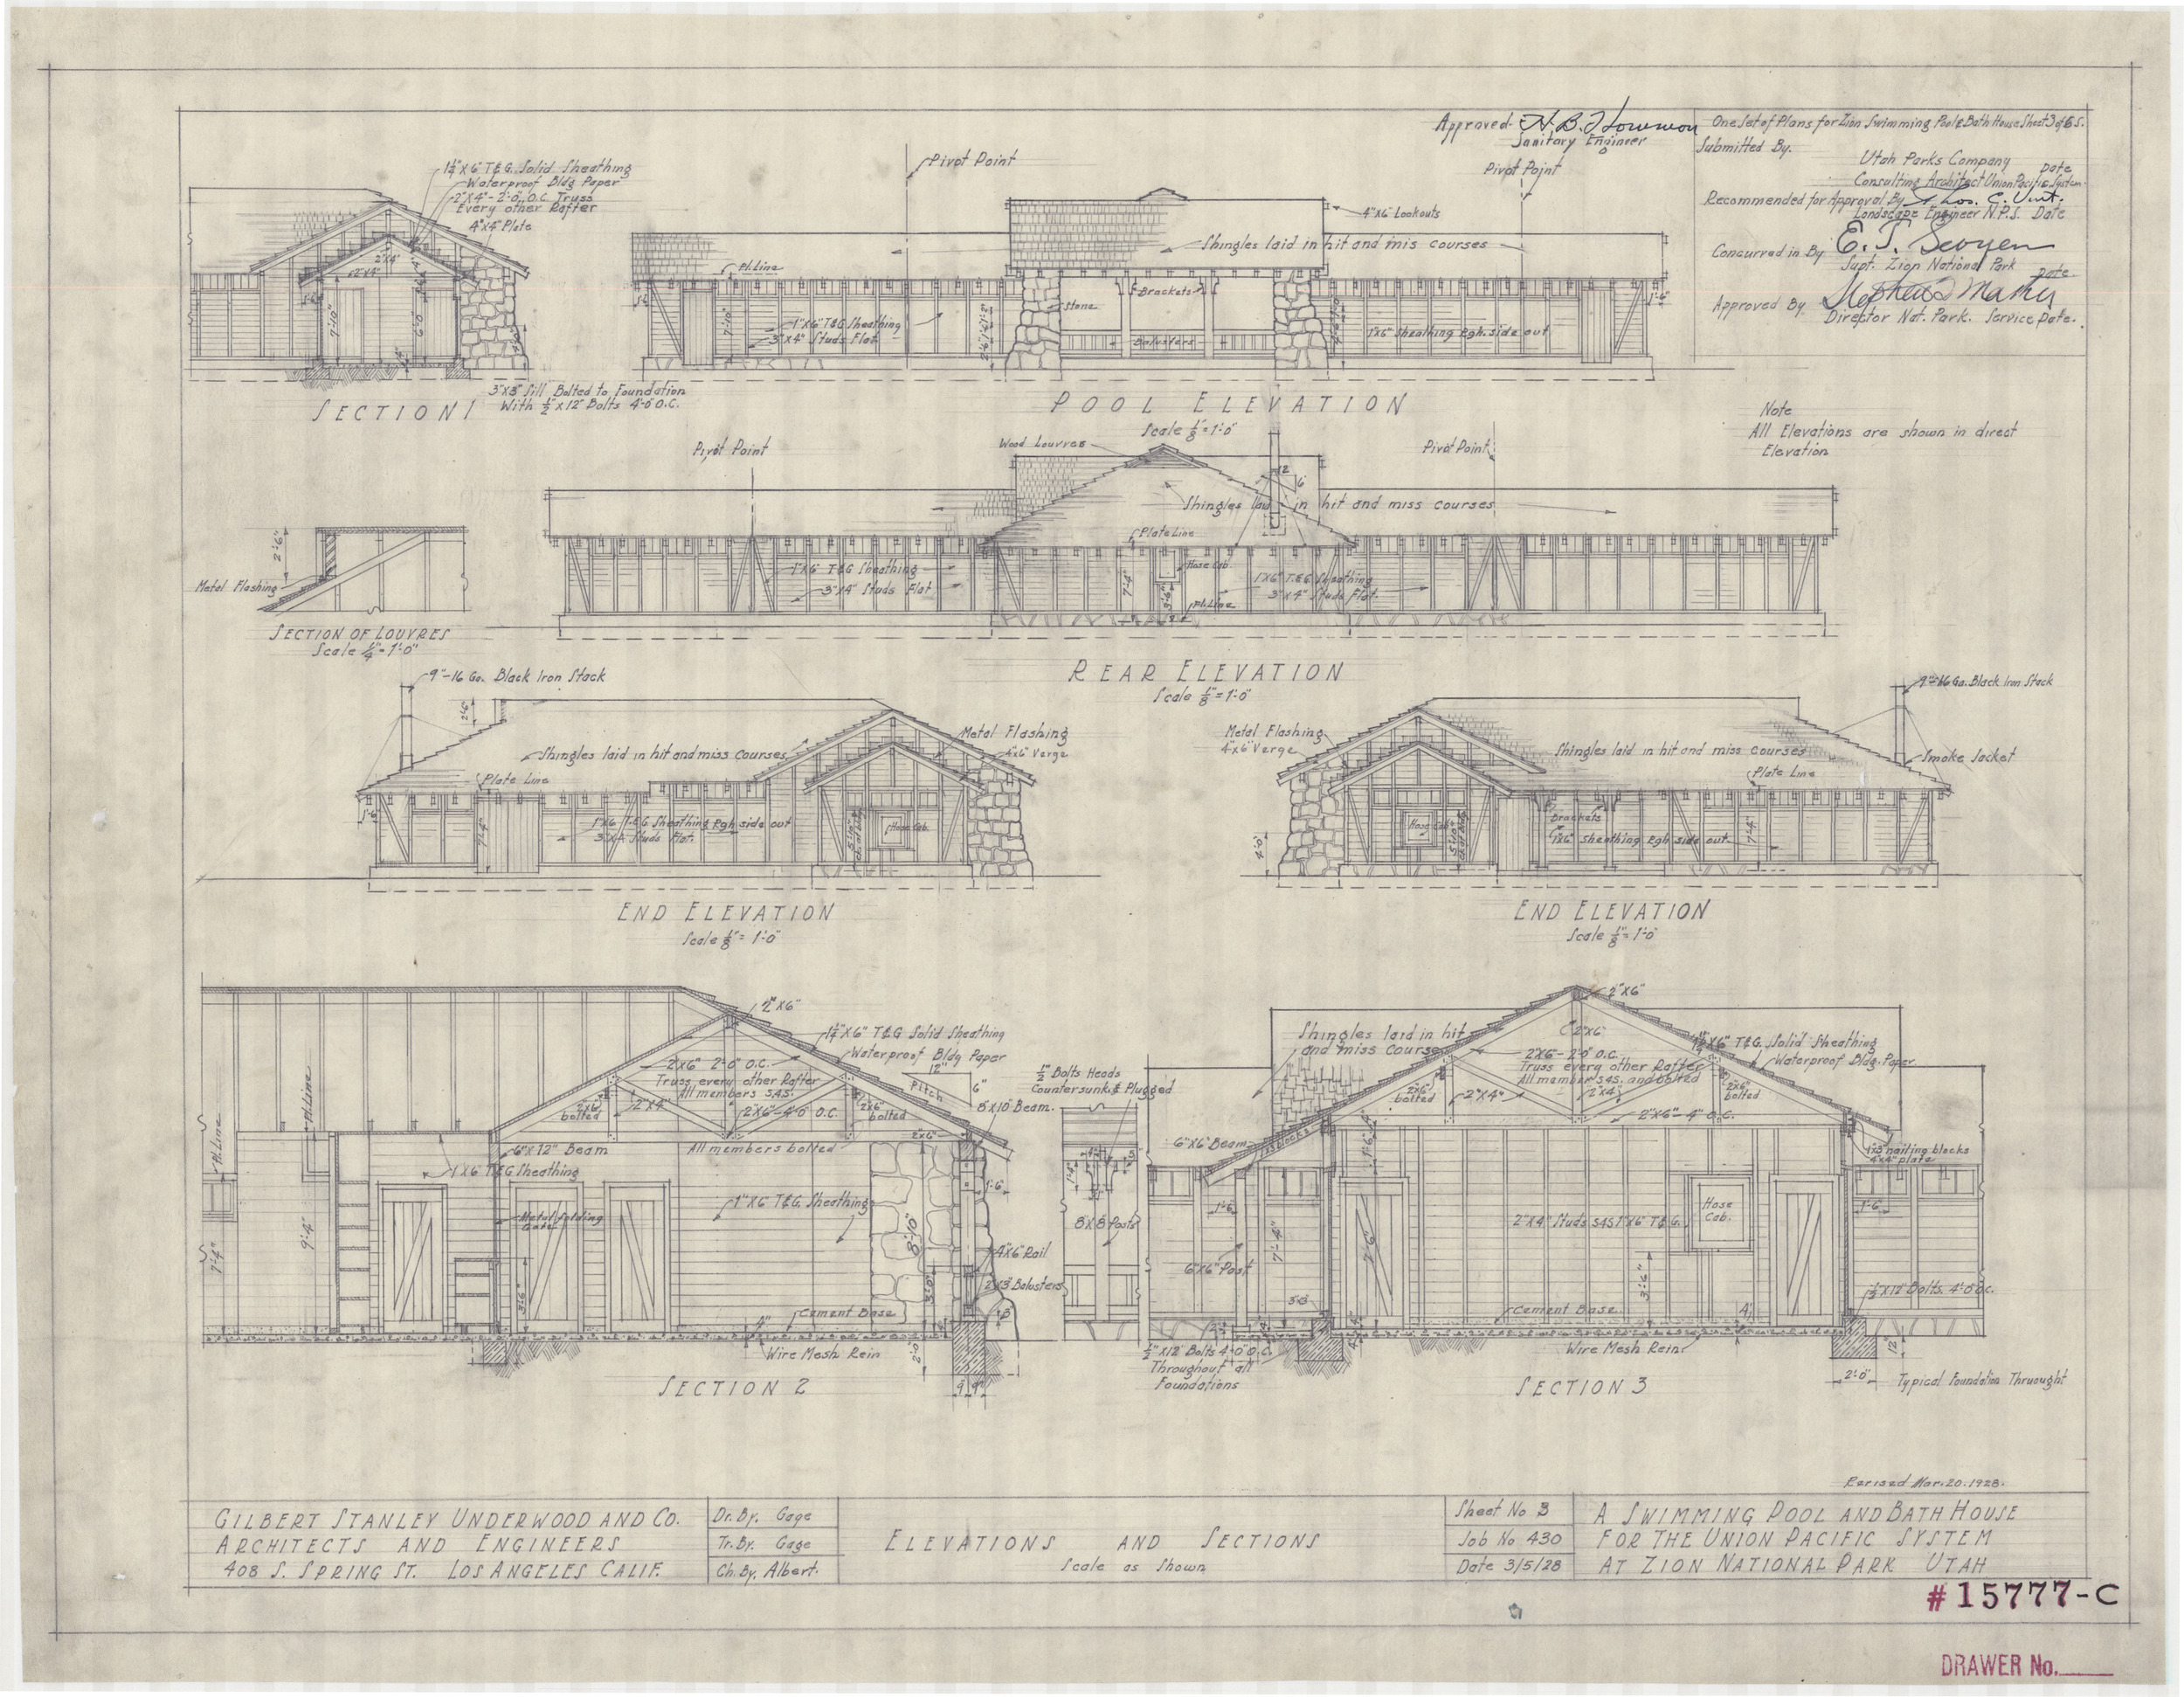 Architectural drawing of swimming pool & bath house at Zion National Park, Utah, floor plan, March 5, 1928, sheet no. 3, elevations and sections